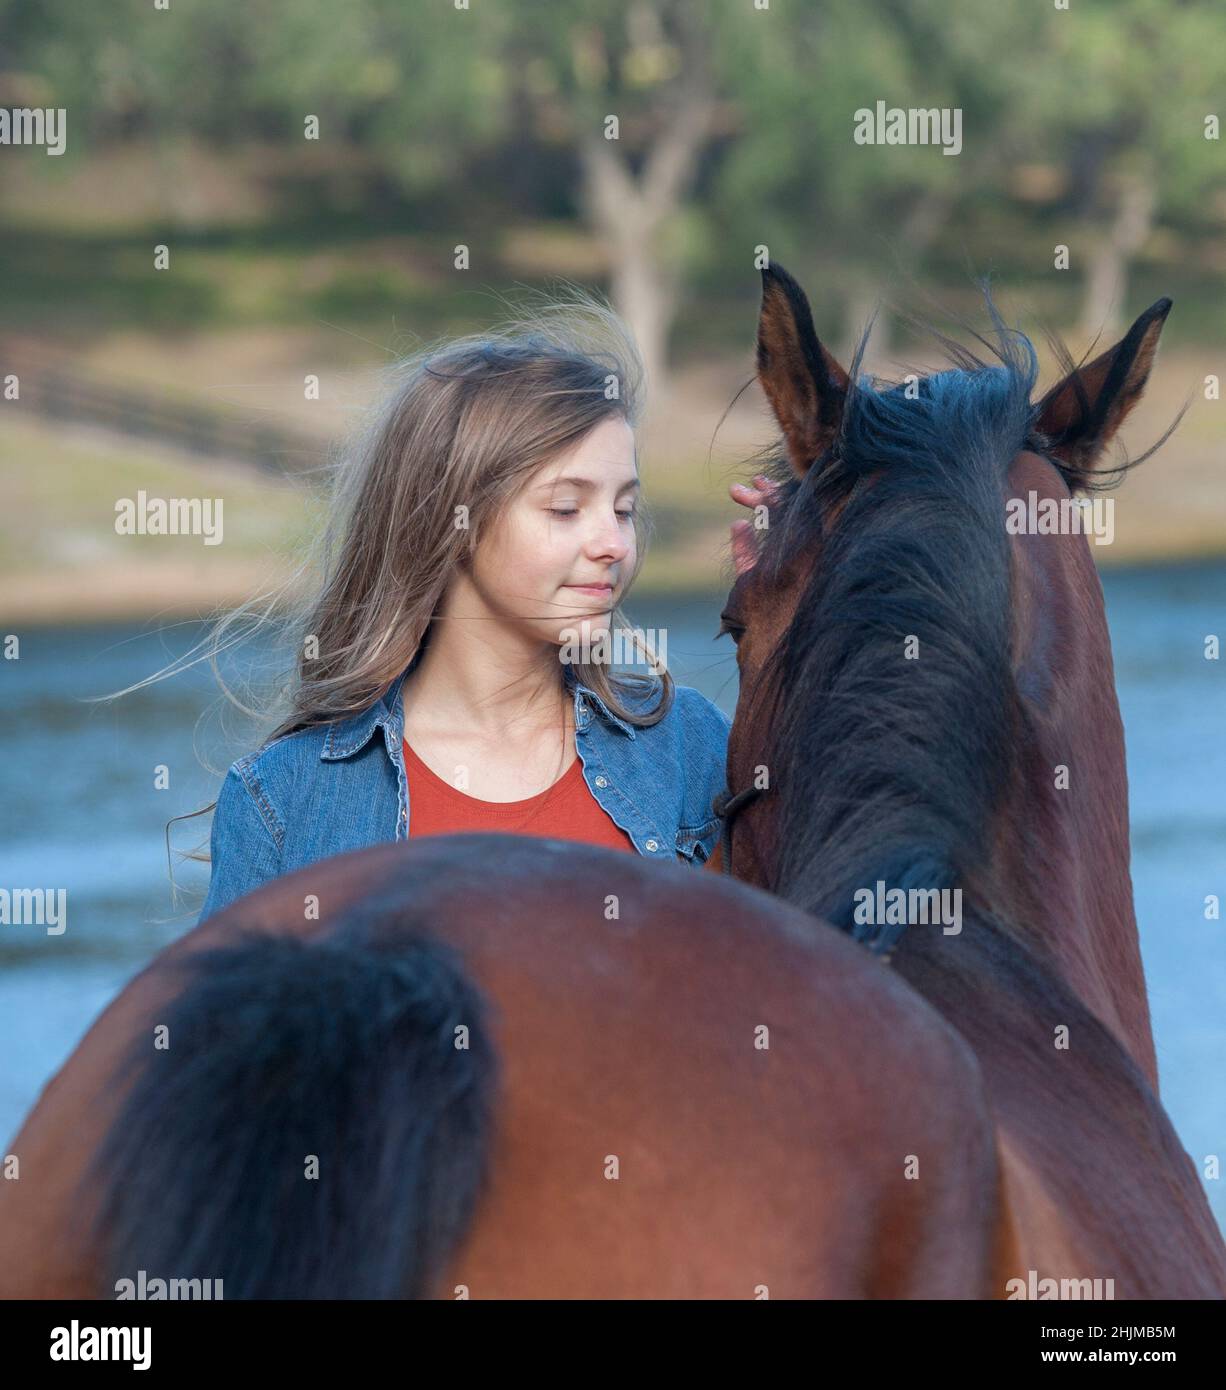 11 year old girl bonds with horse mare Stock Photo